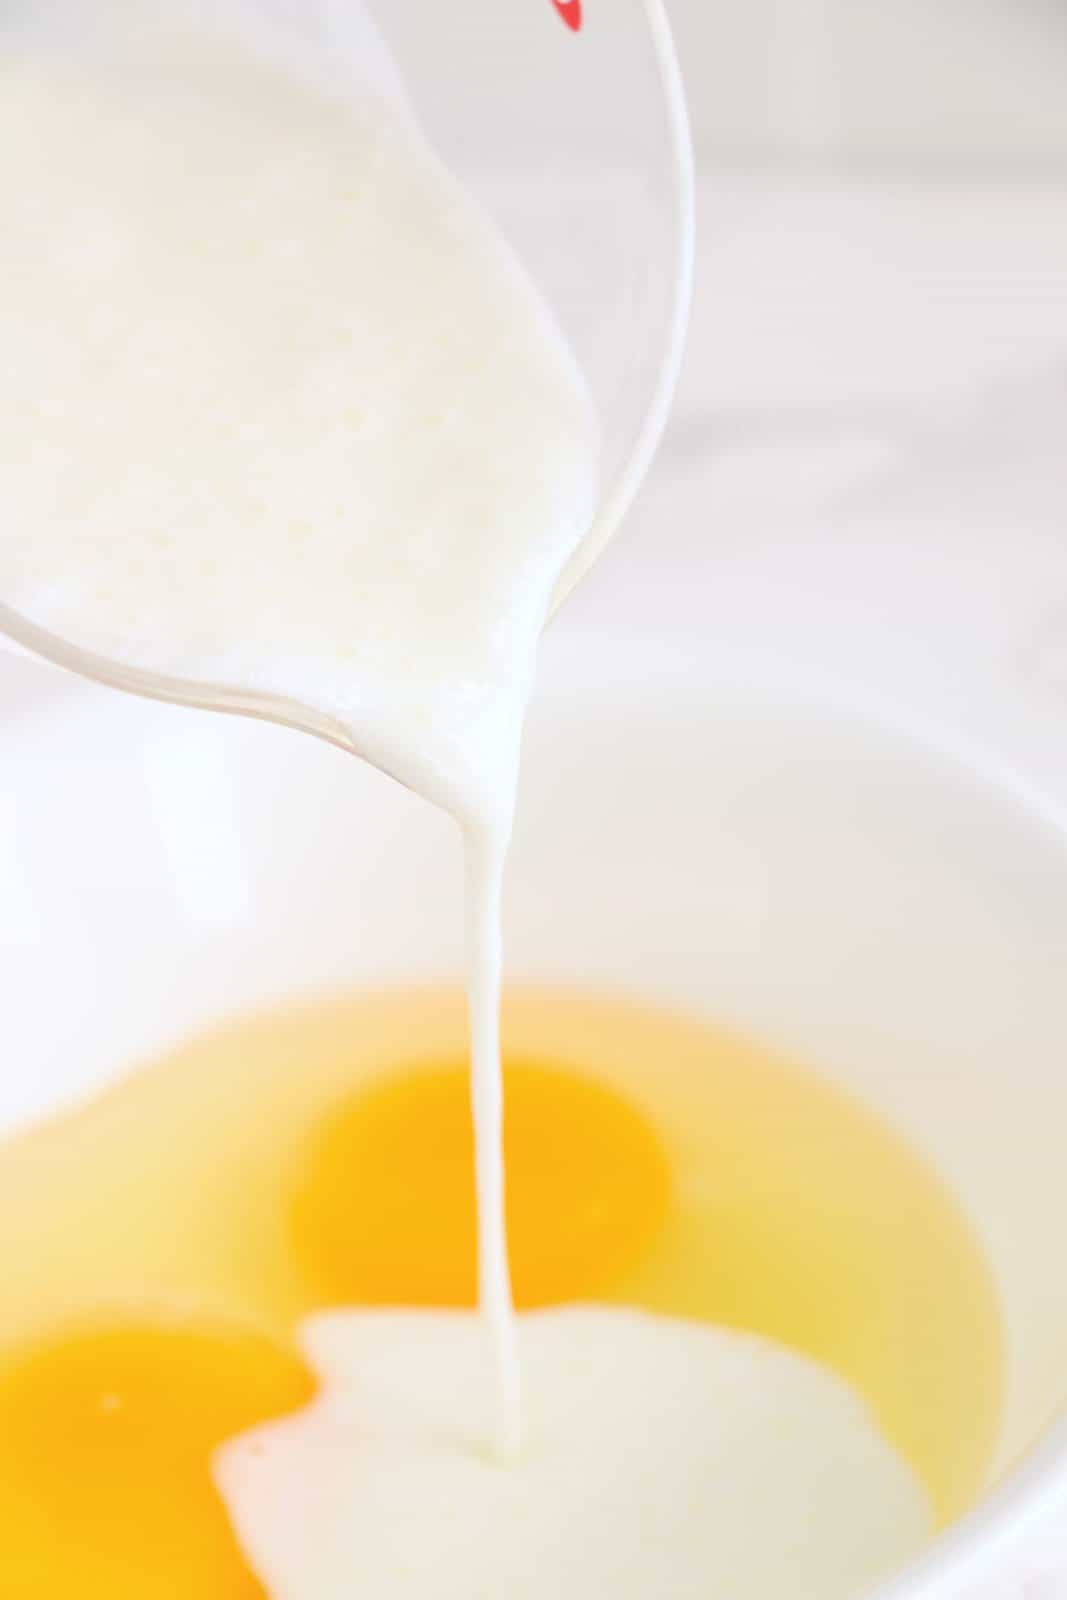 A mixing bowl with eggs and buttermilk being poured in.